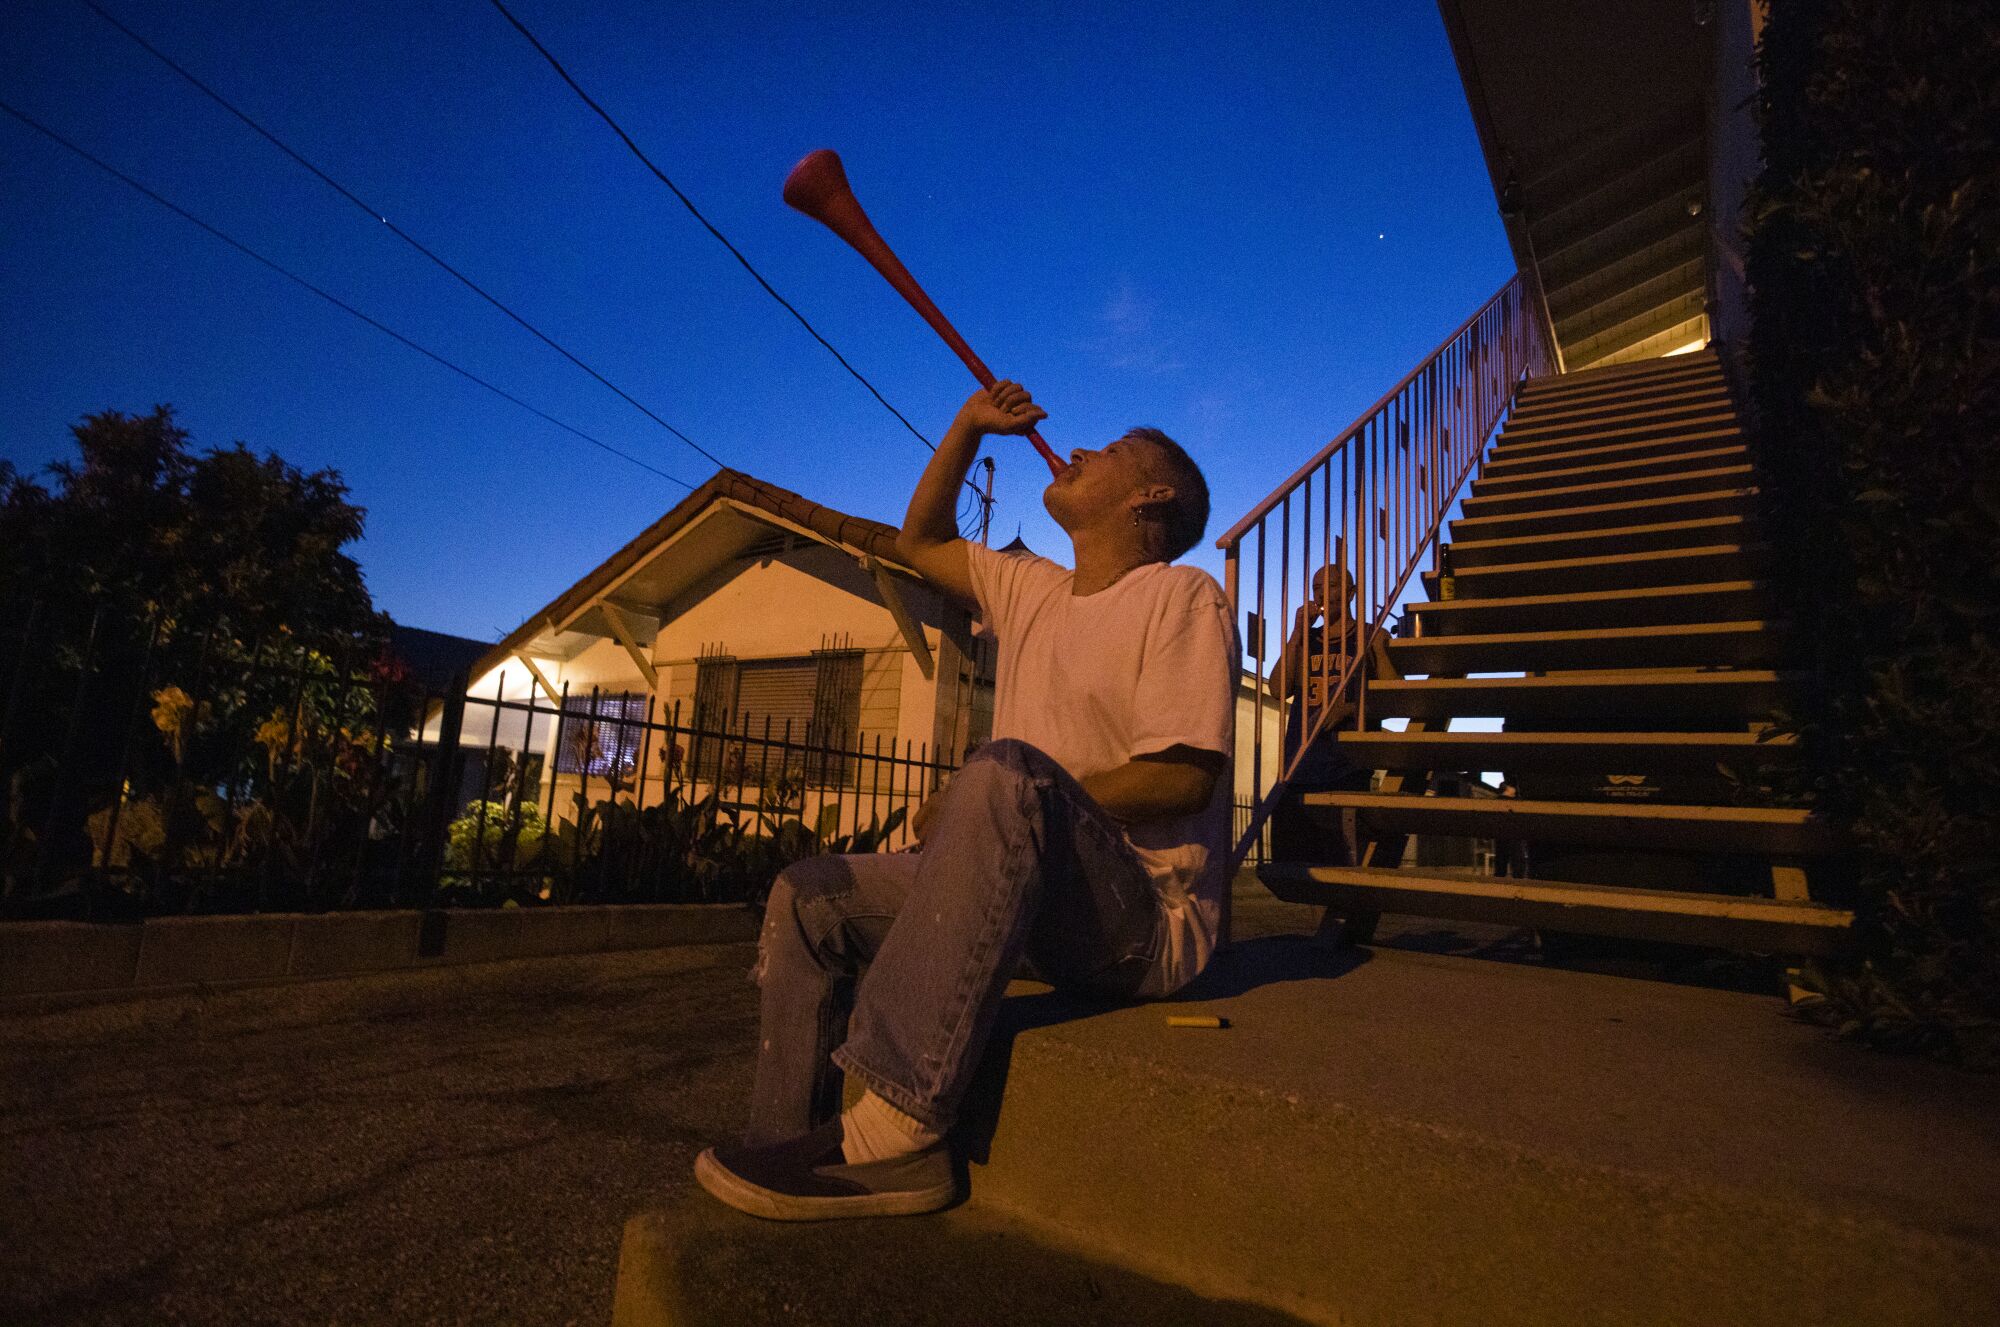 Booka Bickar, 59, makes noise with a plastic horn outside a friend's apartment on Lucile Ave. in Silver Lake, drawing attention to thank essential workers and all the people on the front lines against the coronavirus. Every night for about 5 minutes, starting at 8pm sharp, he and other people on the block and the surrounding area make noise thanking workers.